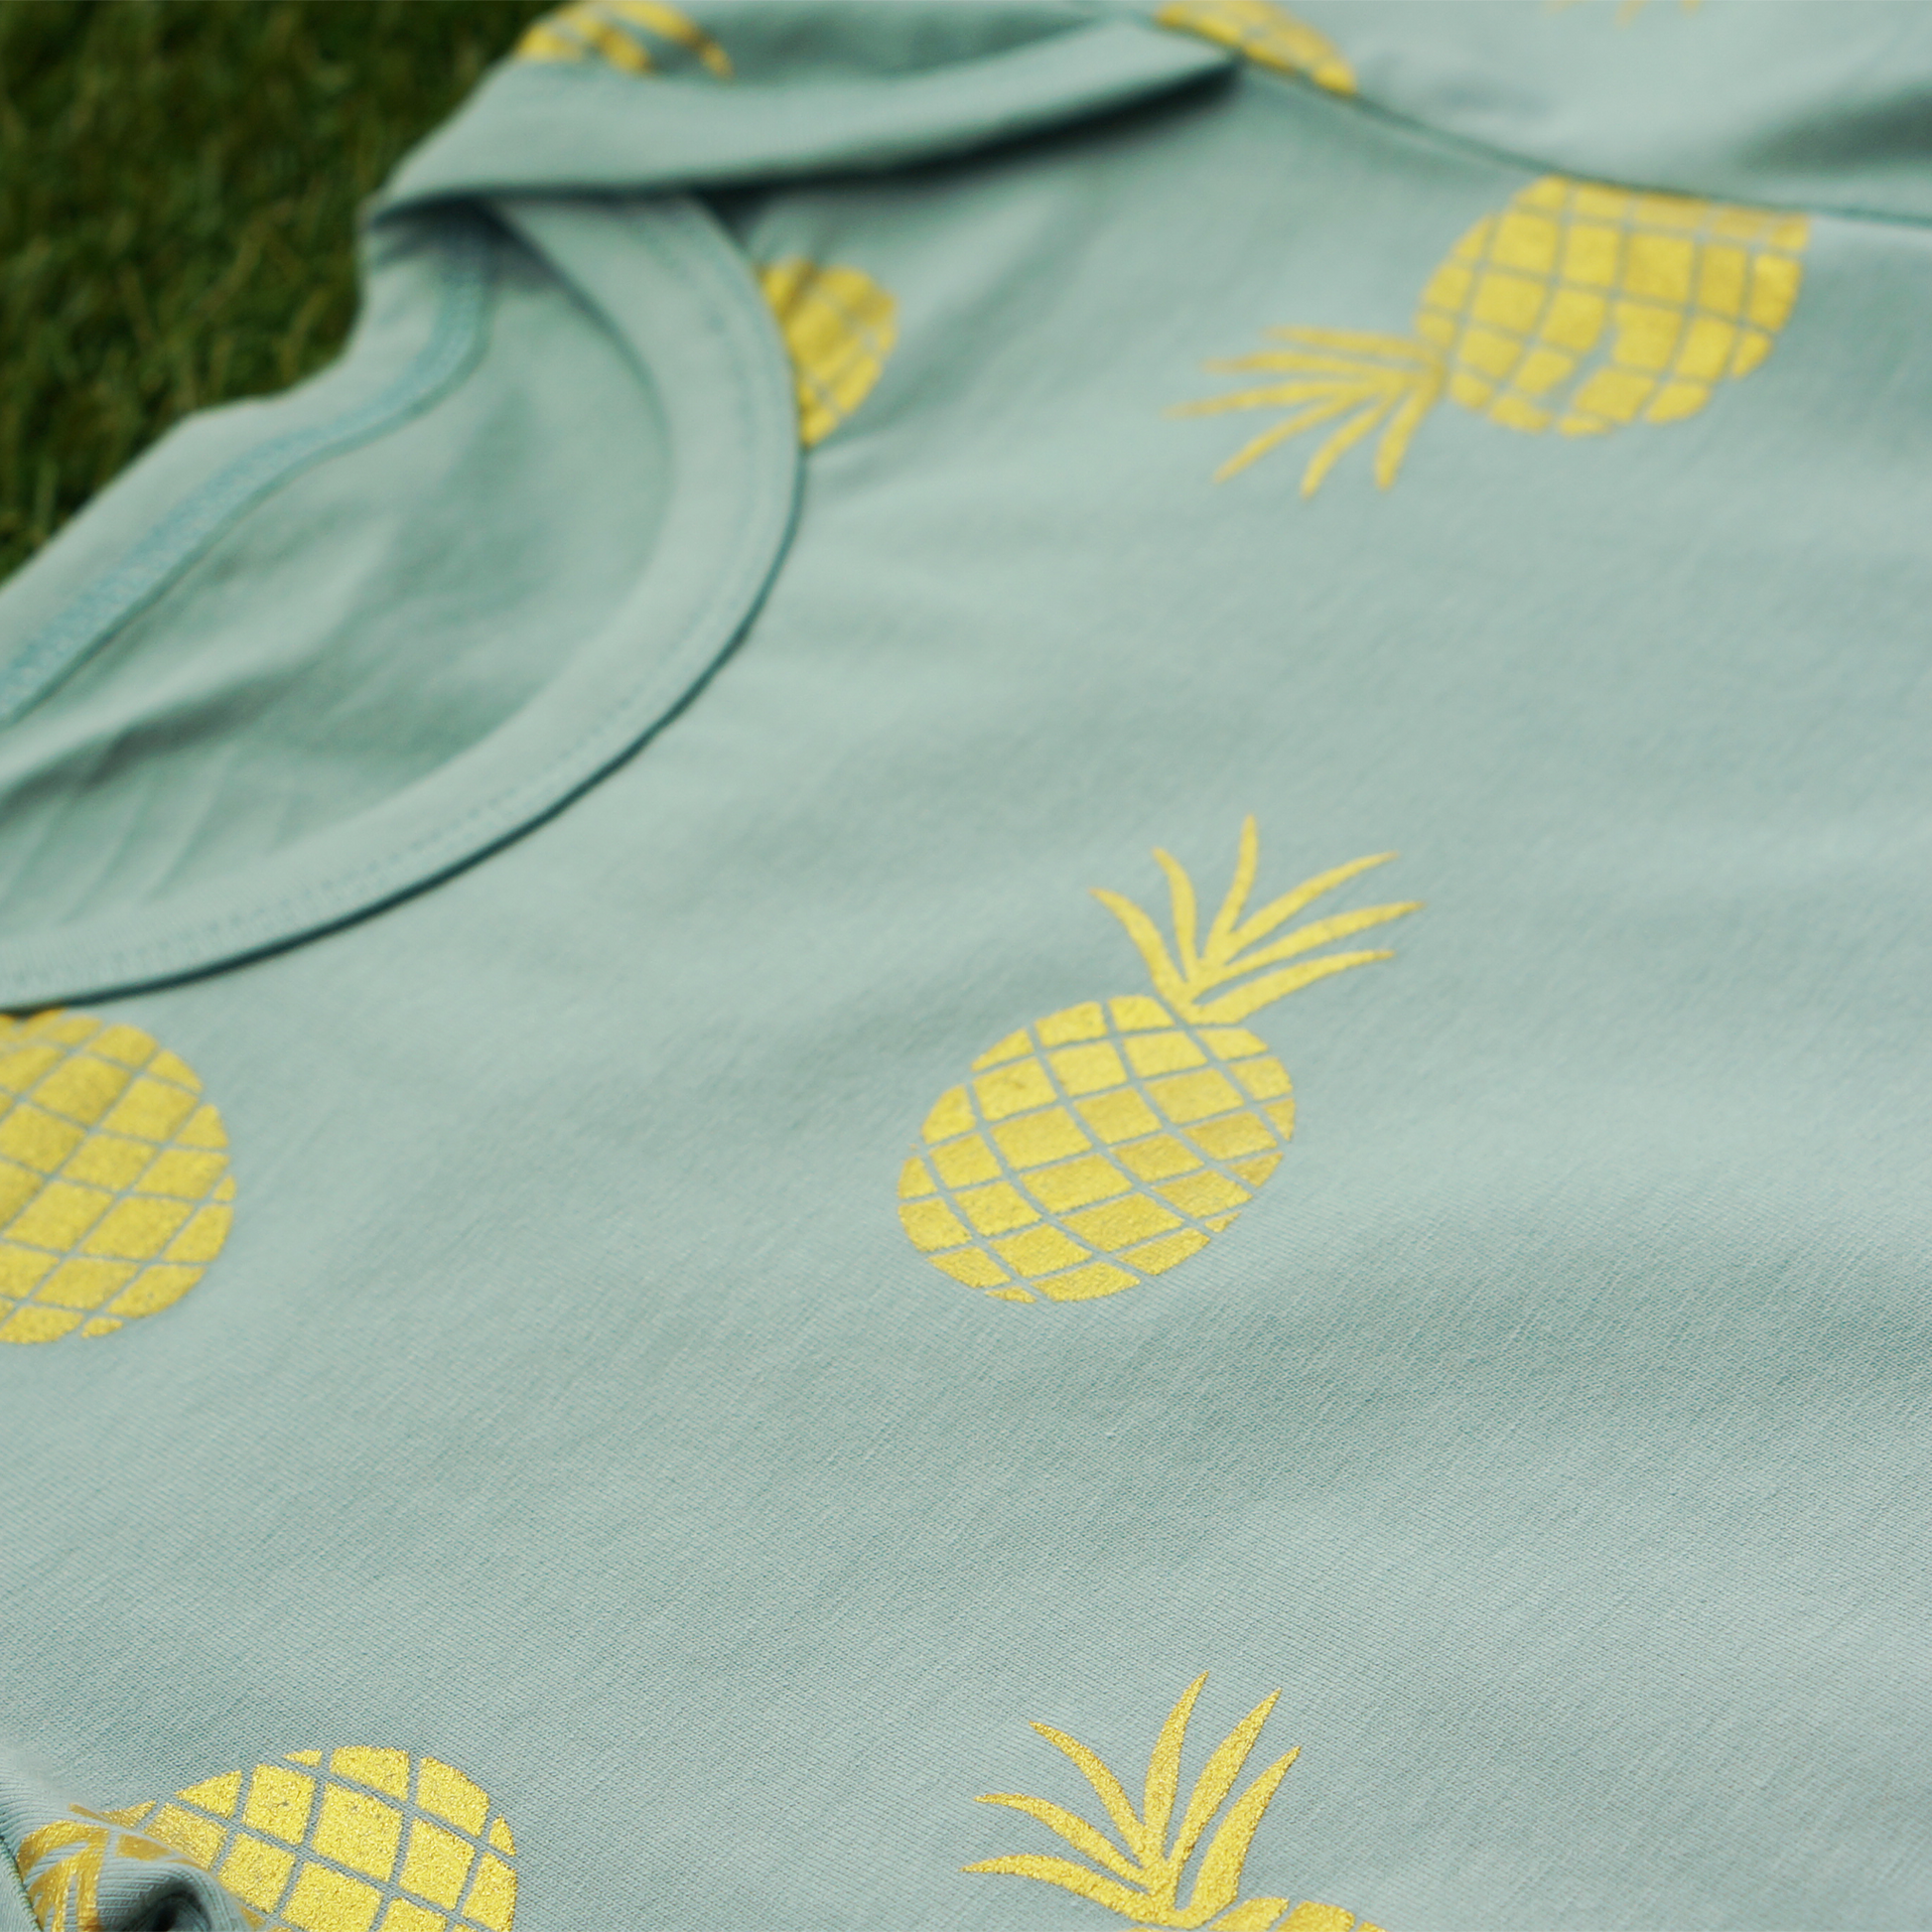 envelope neck baby toddler boy romper onesie in teal colour with golden pineapple print on cotton spandex anak and i sg anak & i sg